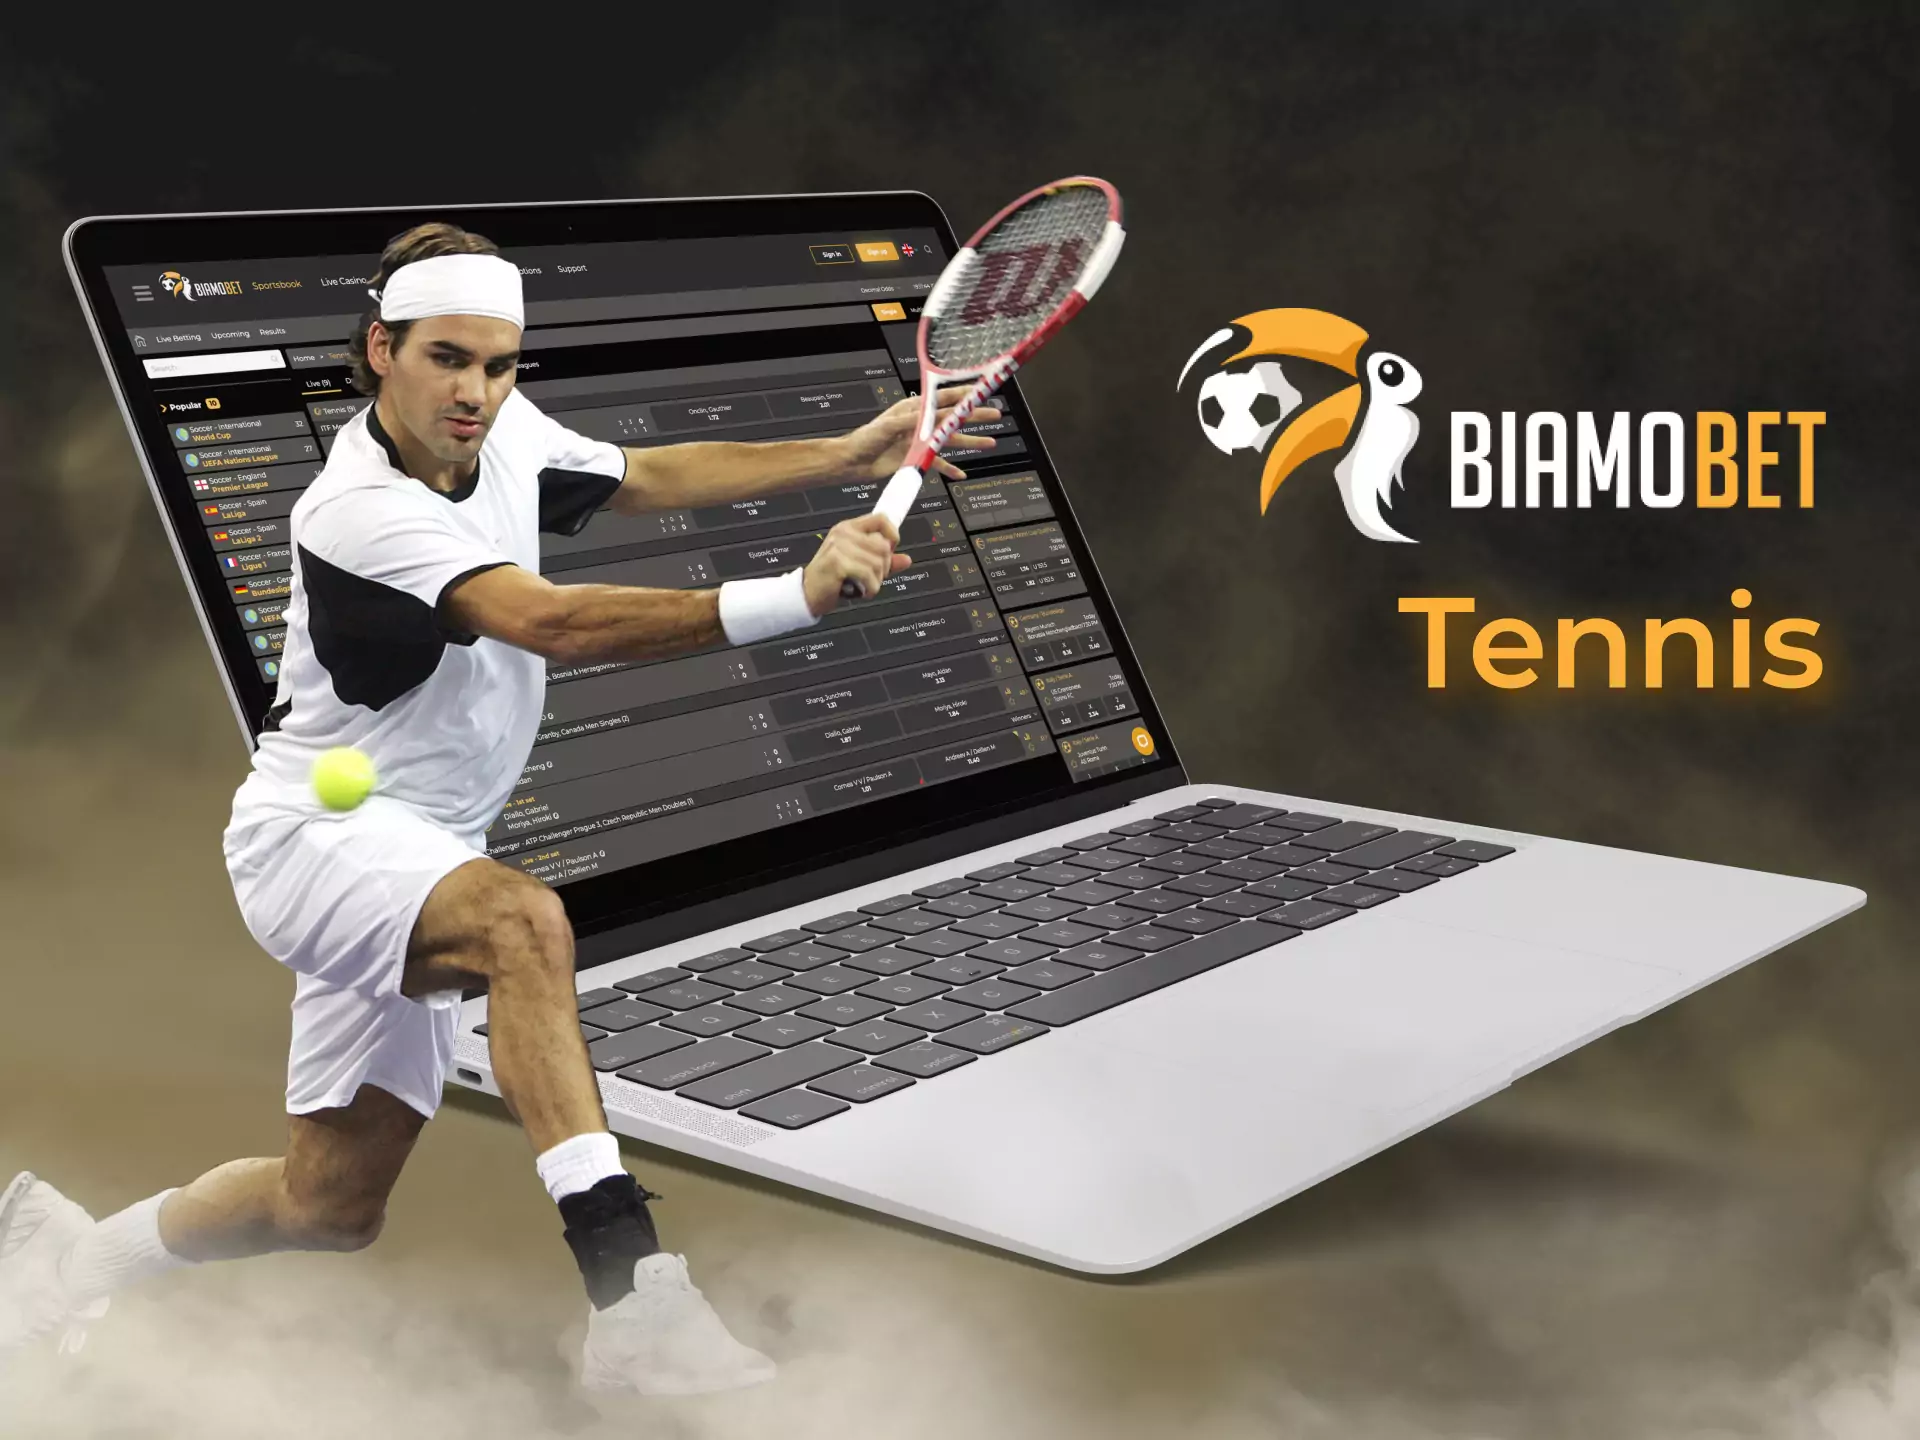 You can place a bet on tennis matches on the Biamobet website.